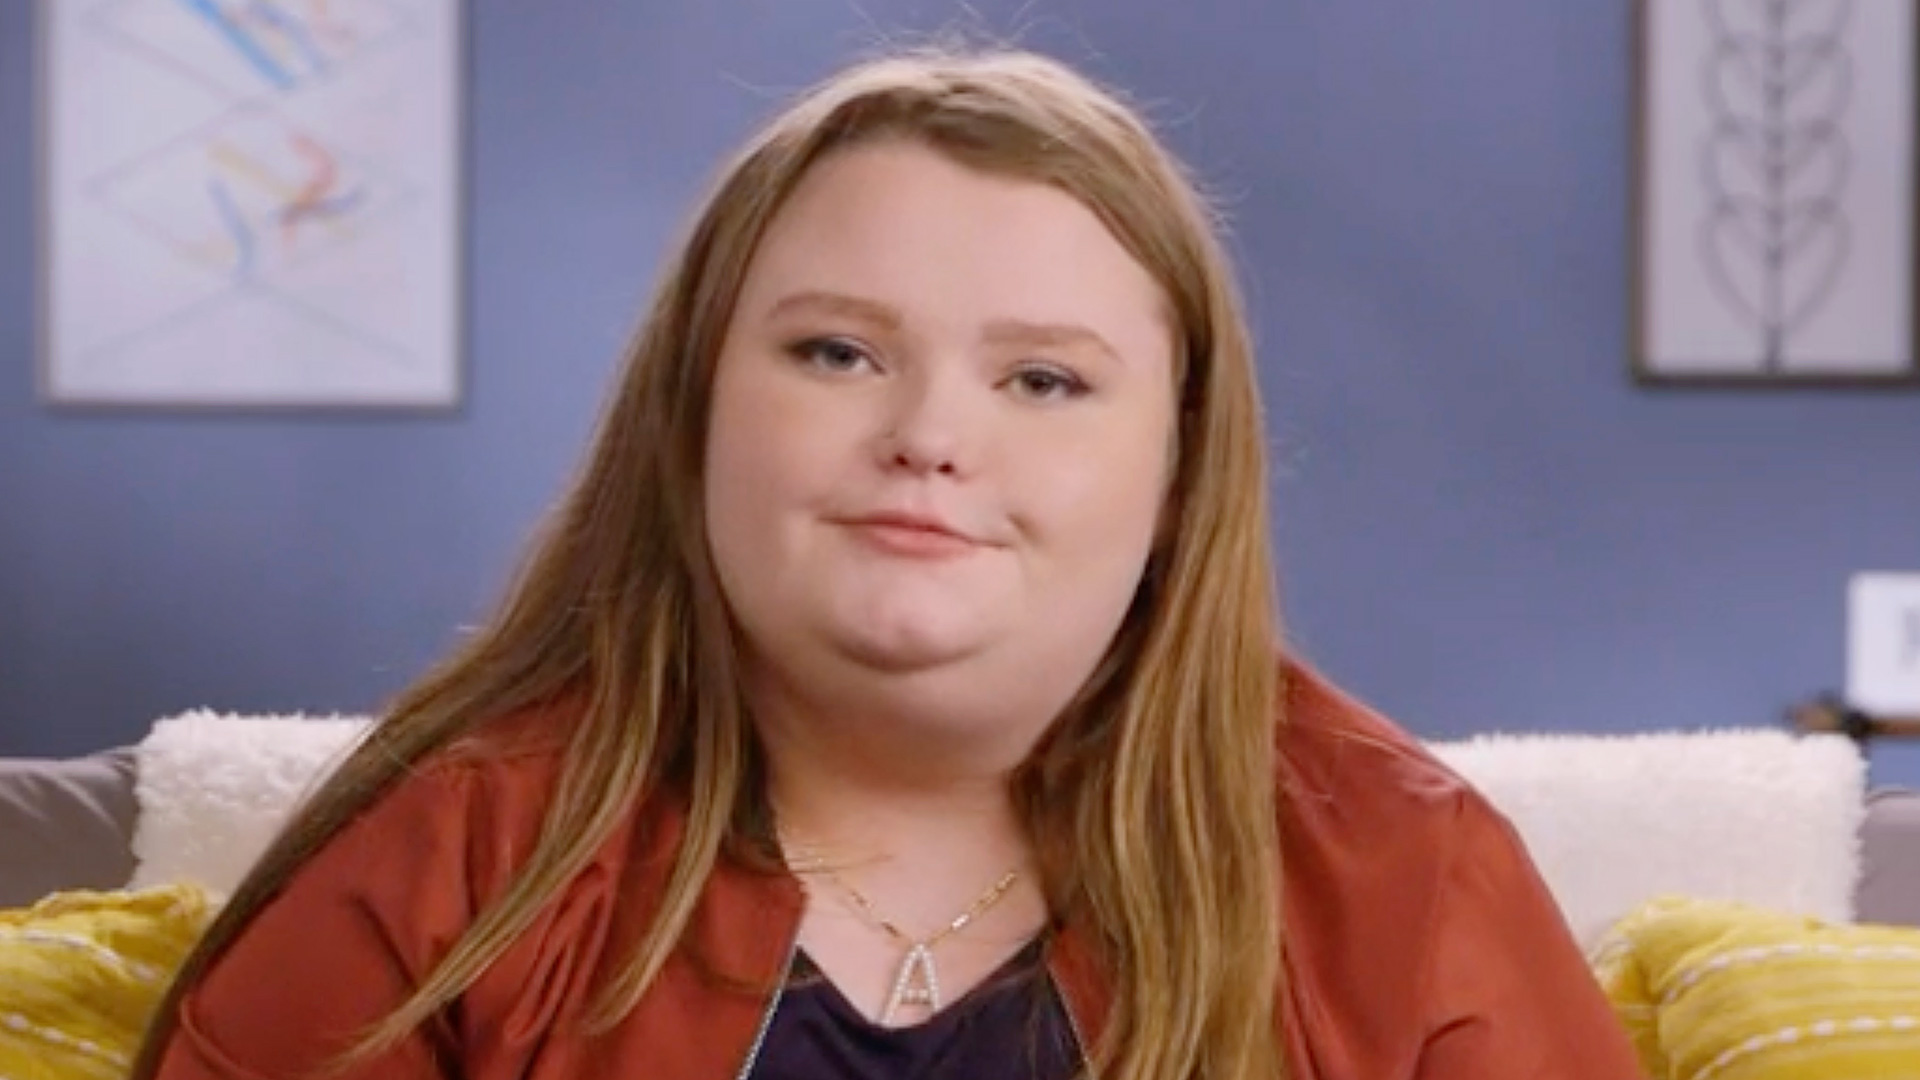 Mama June’s 16 year old daughter Honey Boo Boo Boo sparks concern when she disappears TikTok amid boyfriend’s ‘rape’ bombshell